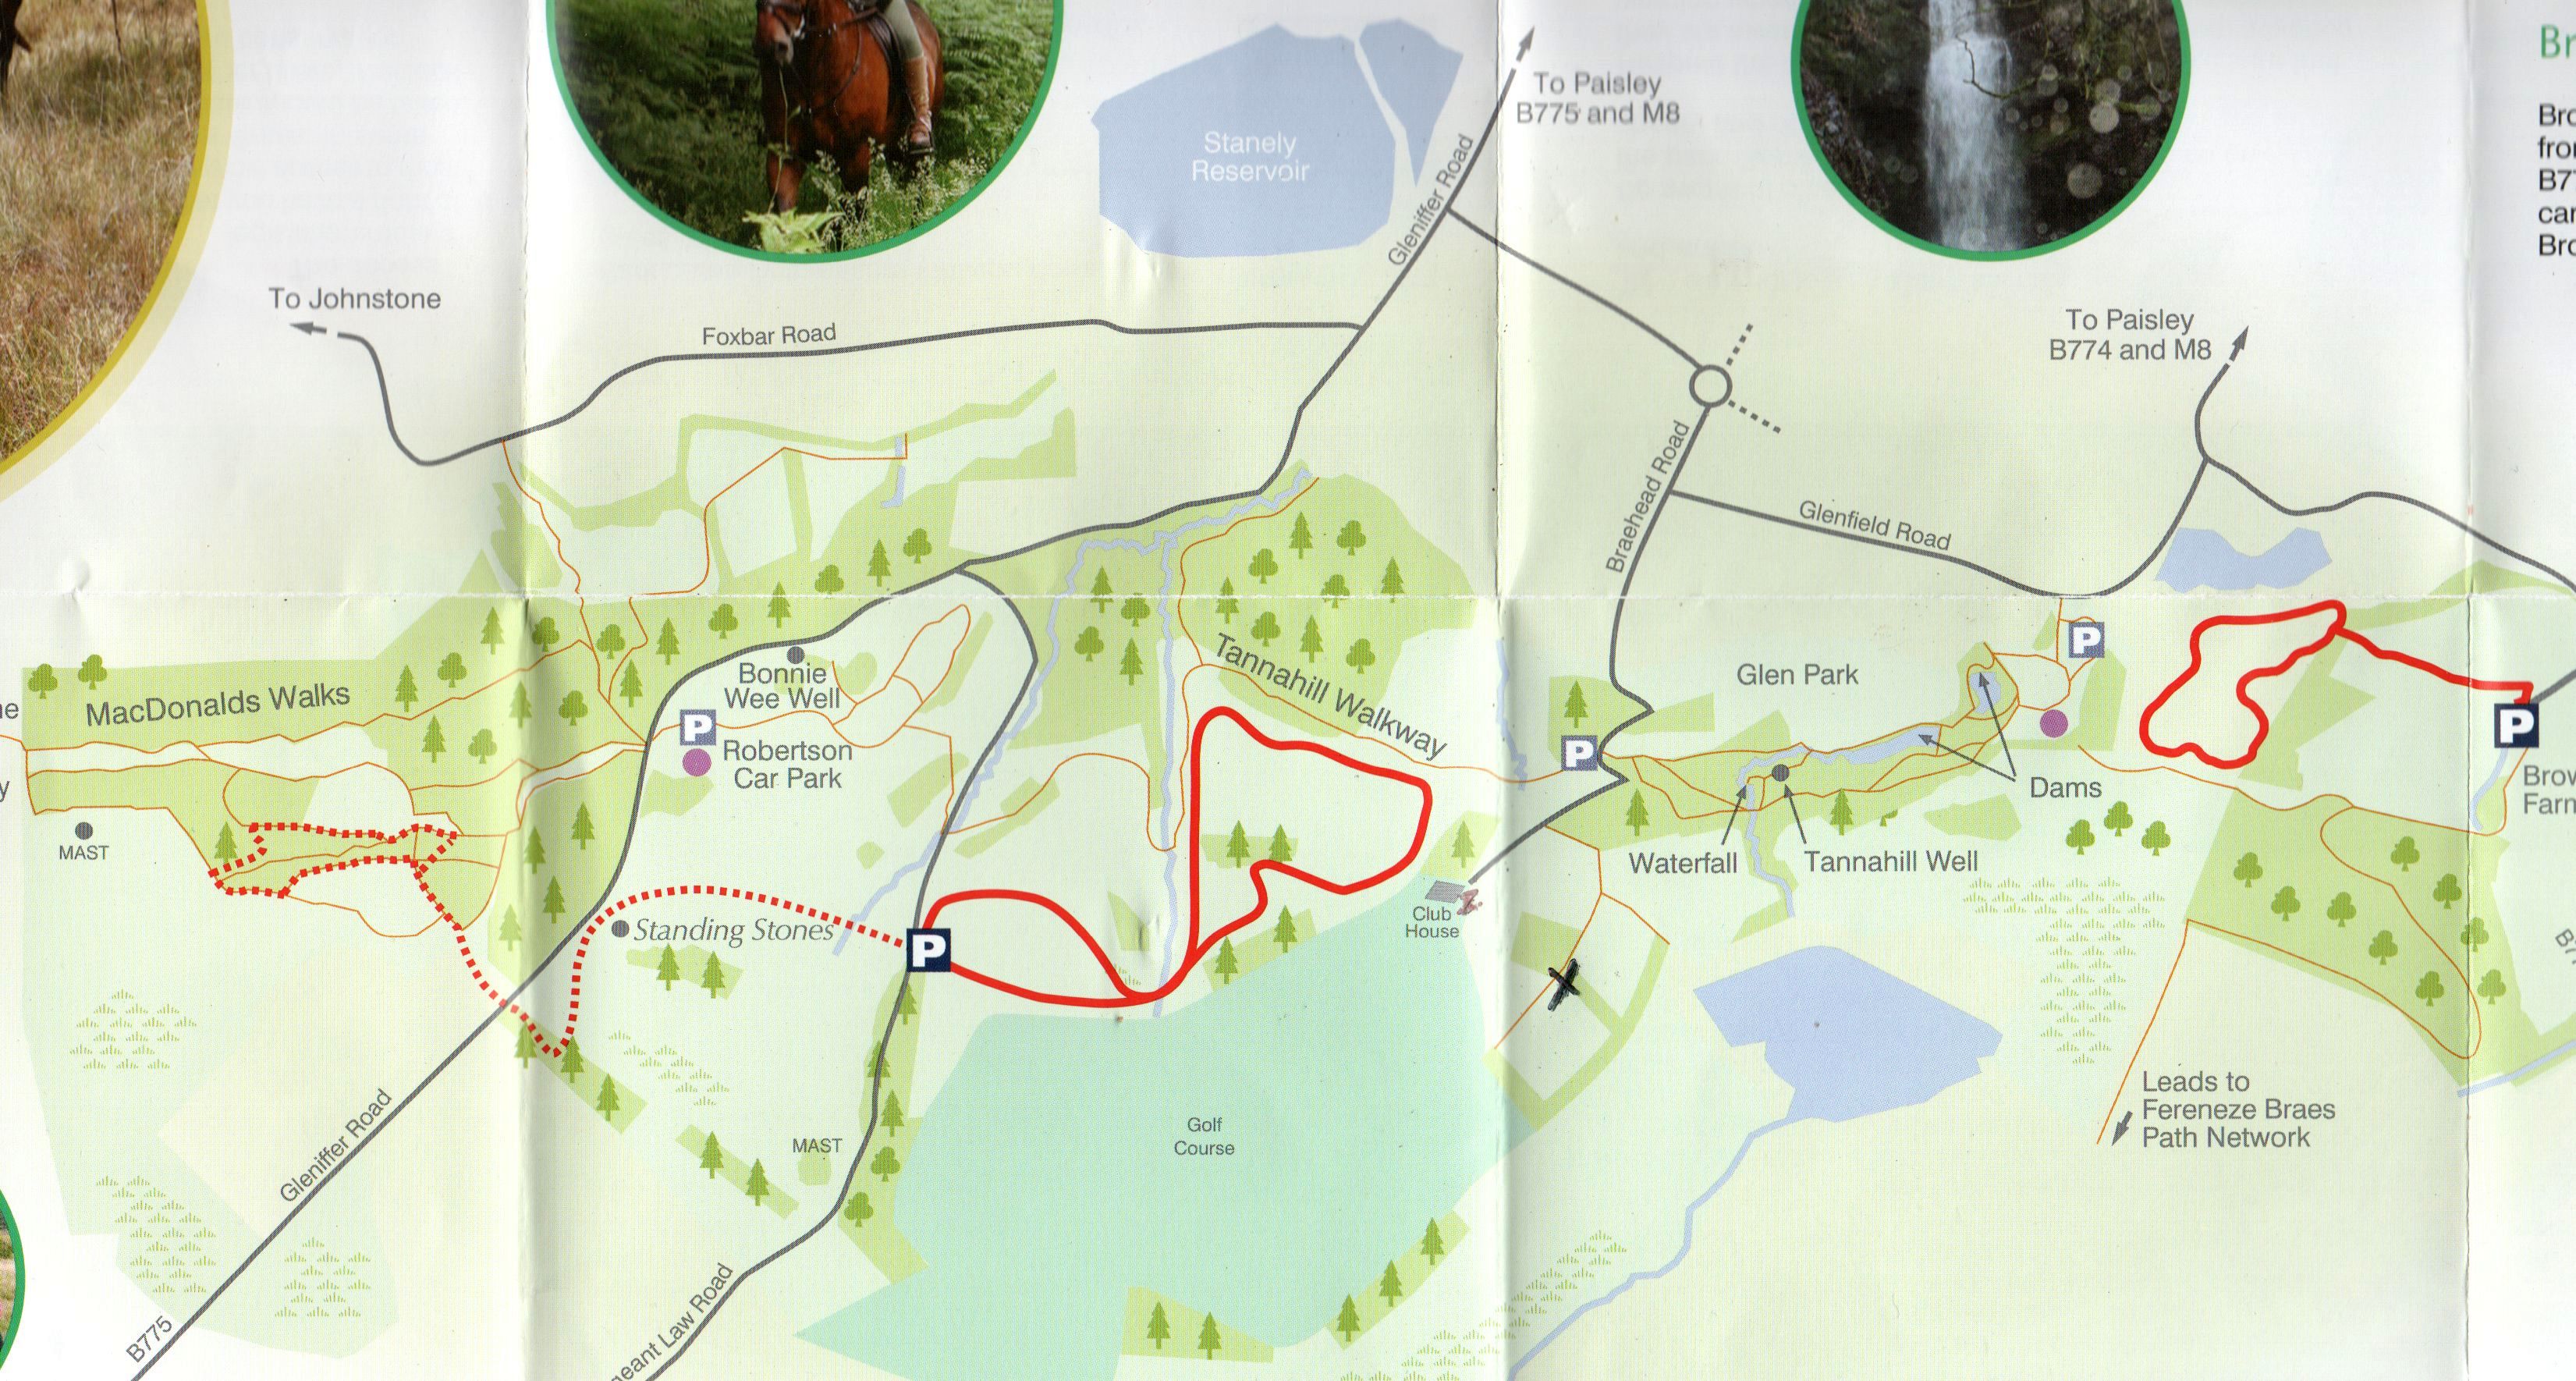 Map of Gleniffer Braes Country Park on the southern outskirts of Paisley